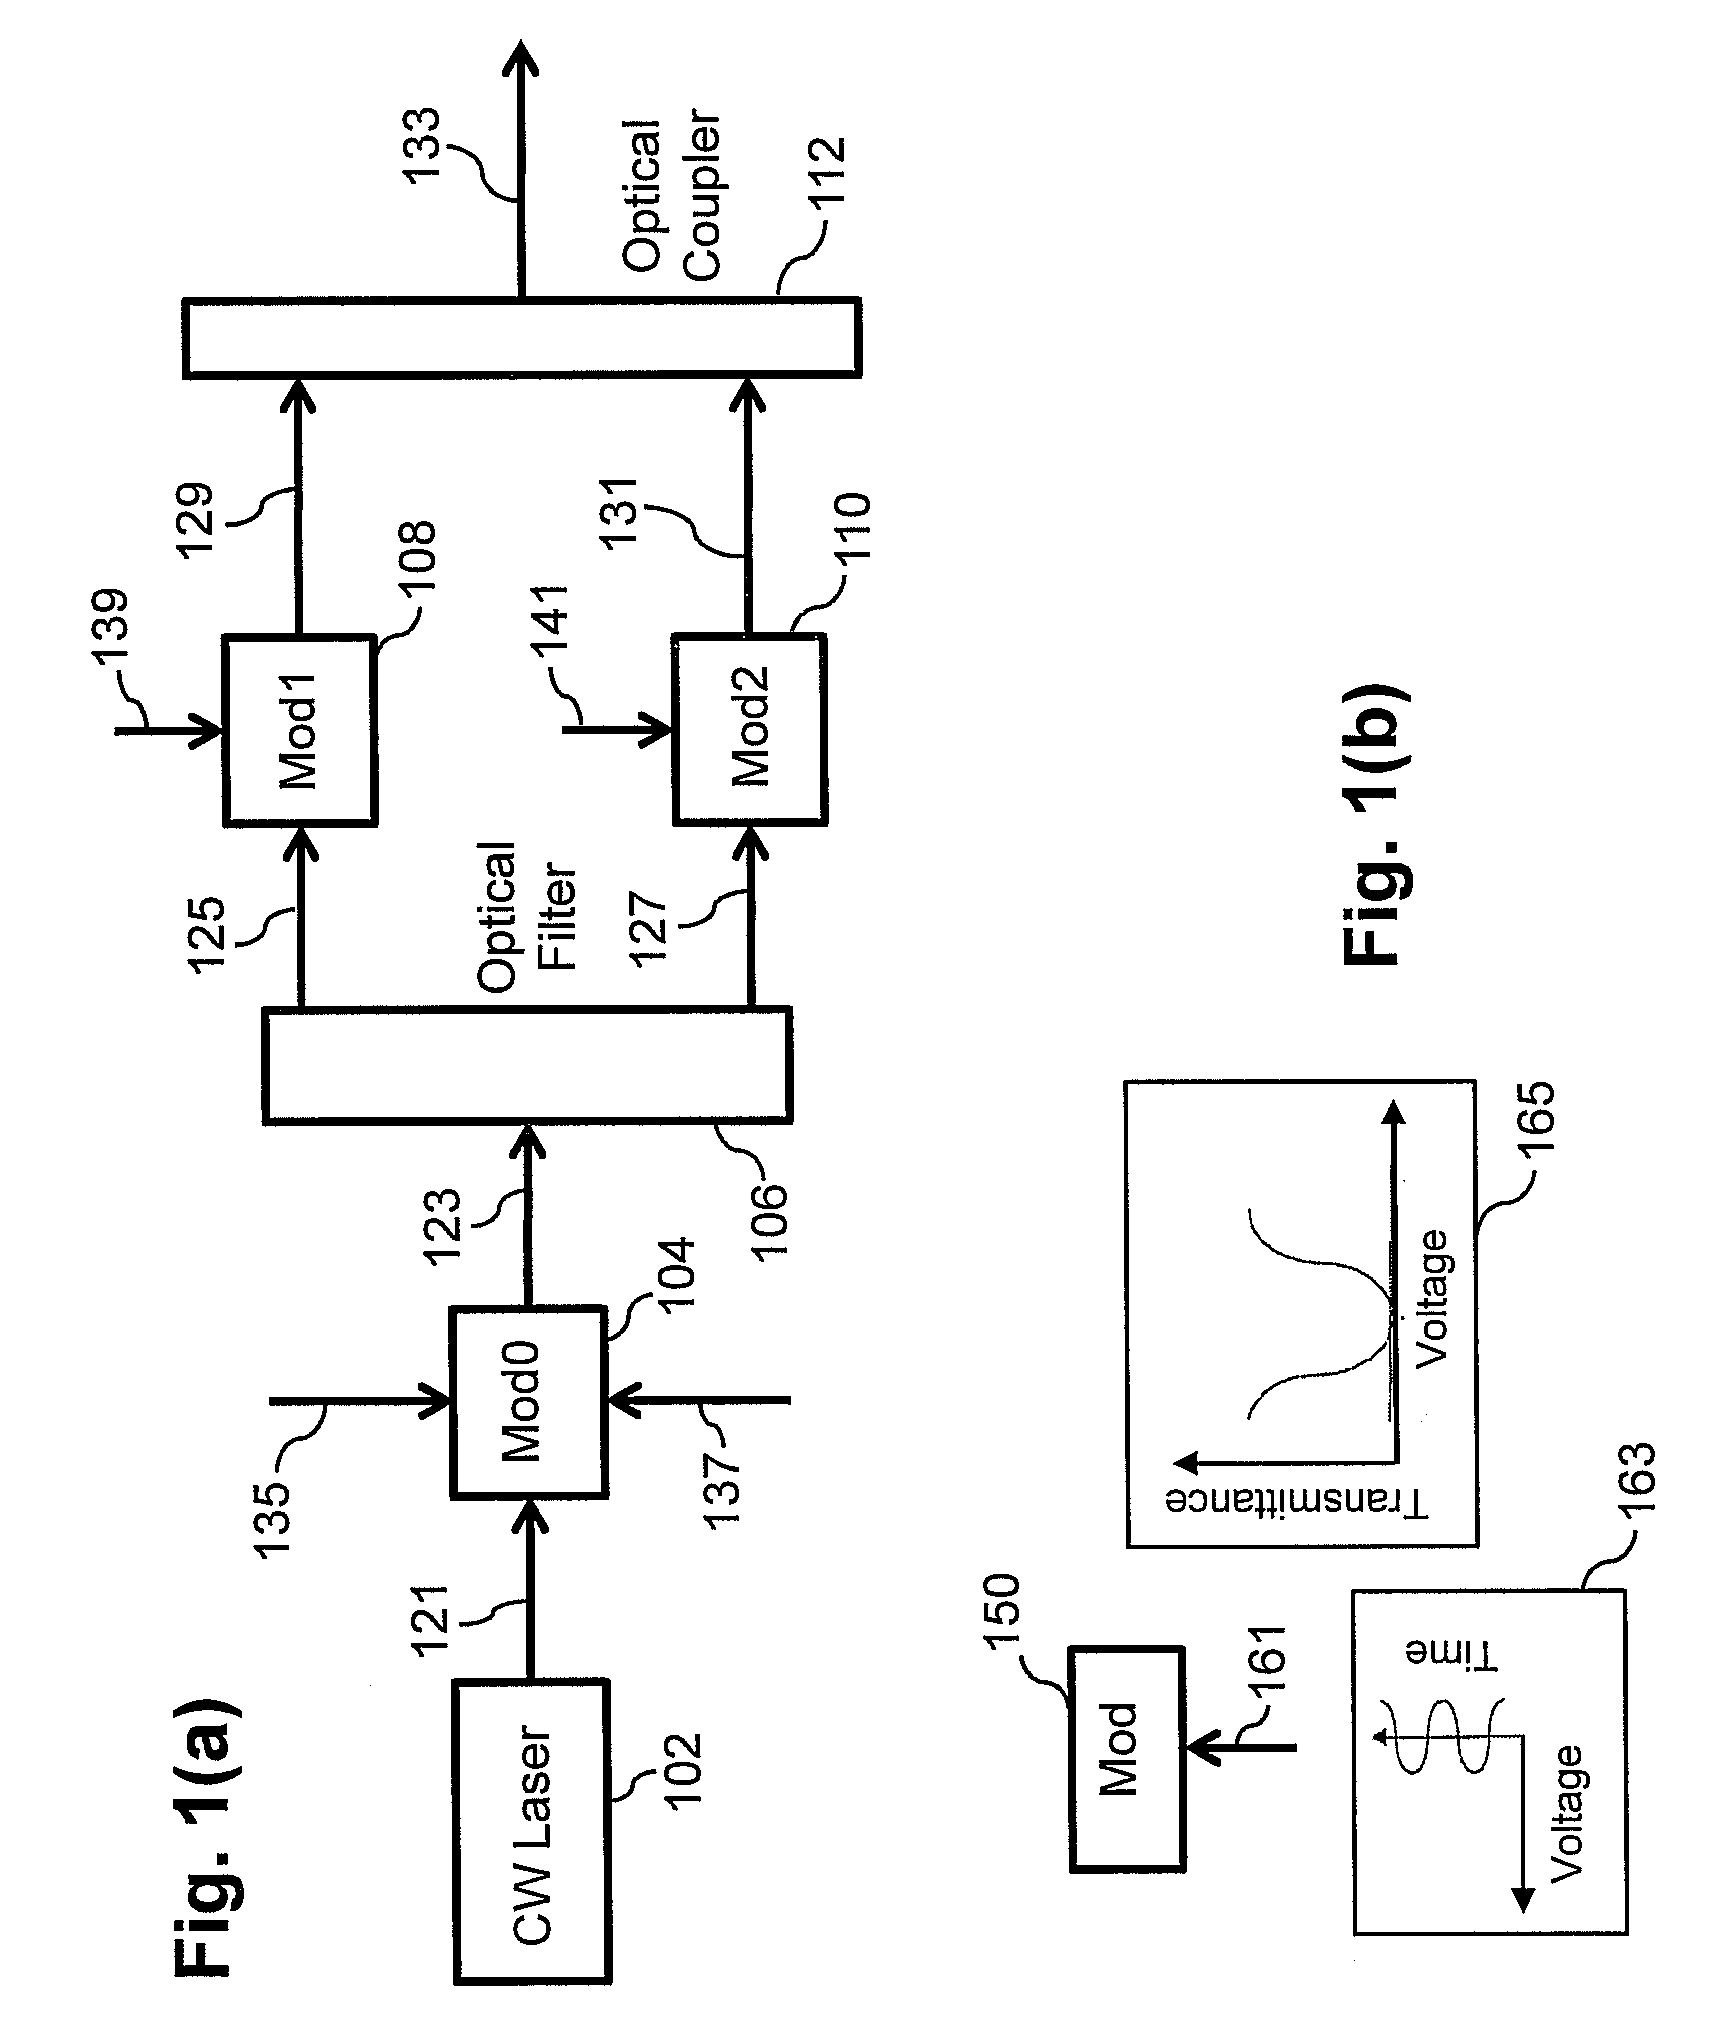 High Bit Rate Packet Generation with High Spectral Efficiency in an Optical Network